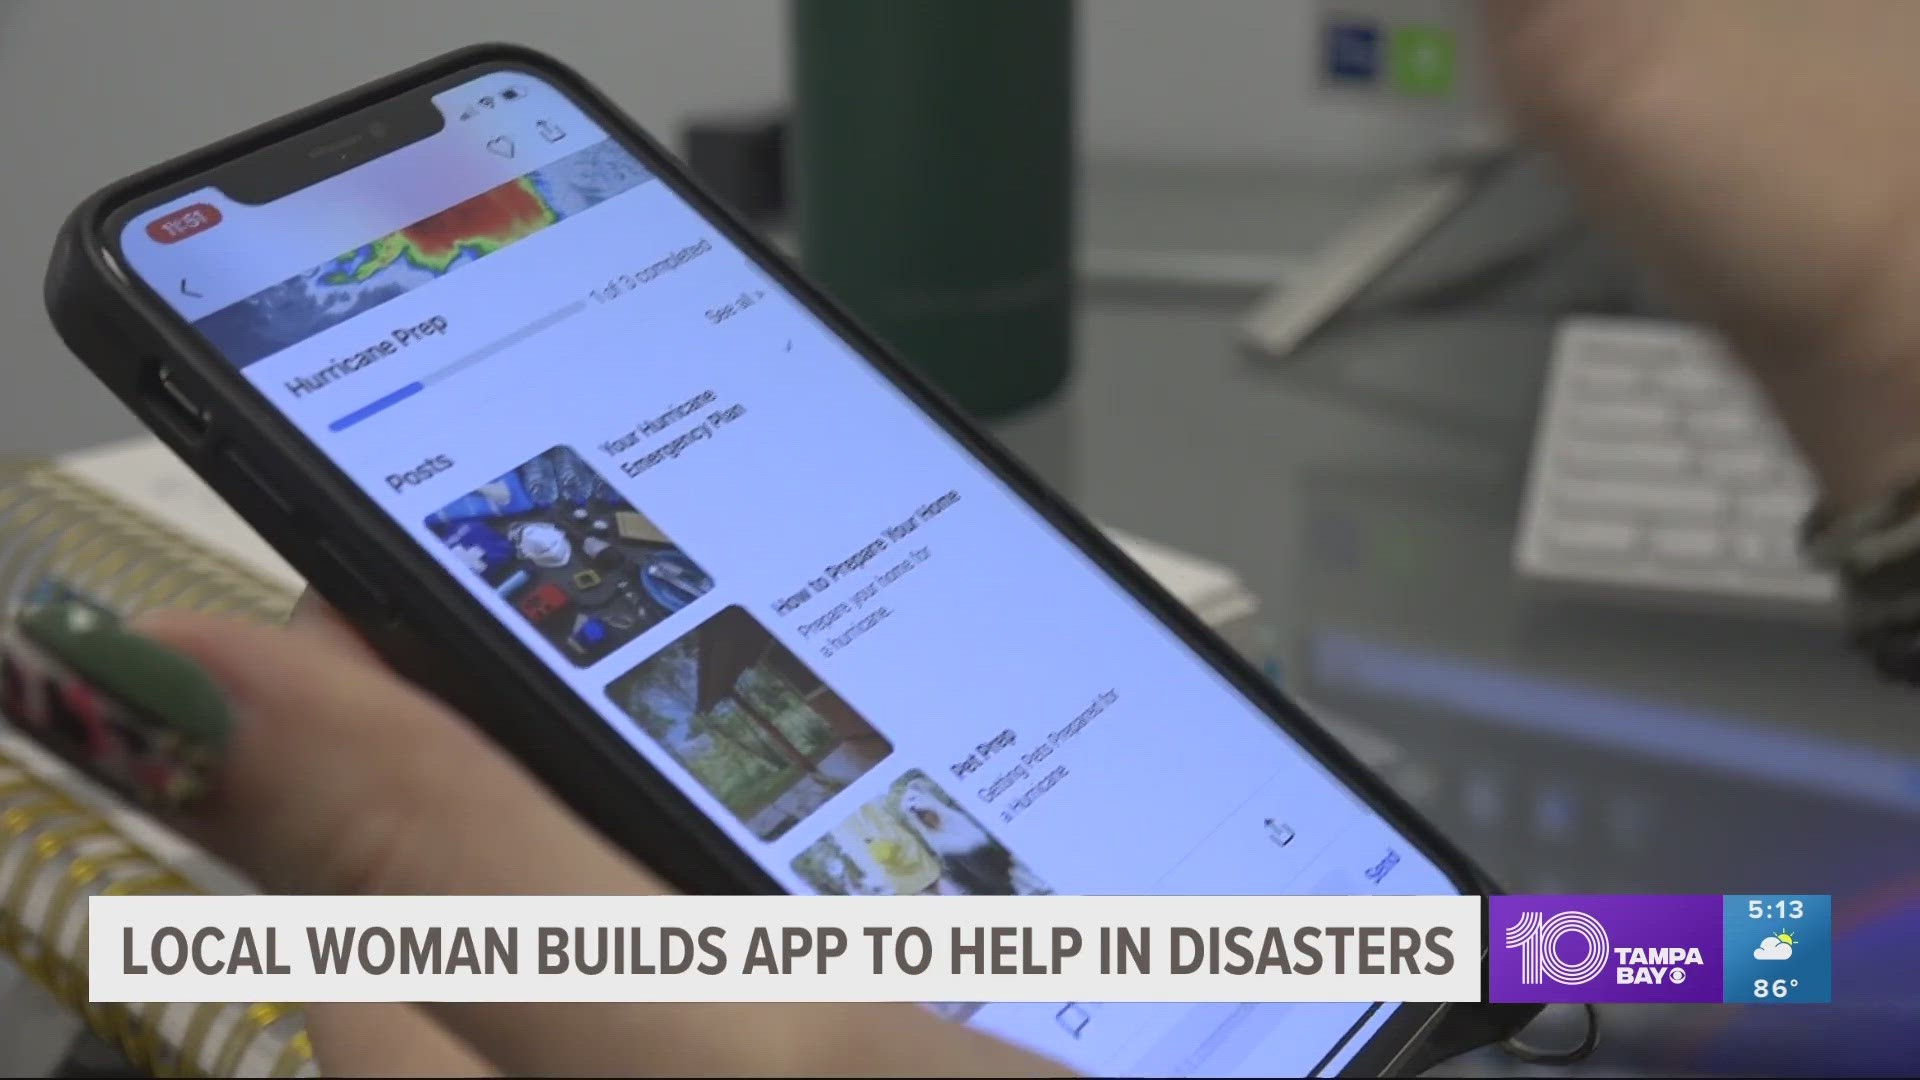 The app aims to connect people with valuable local resources and up-to-date information during emergencies, like hurricanes